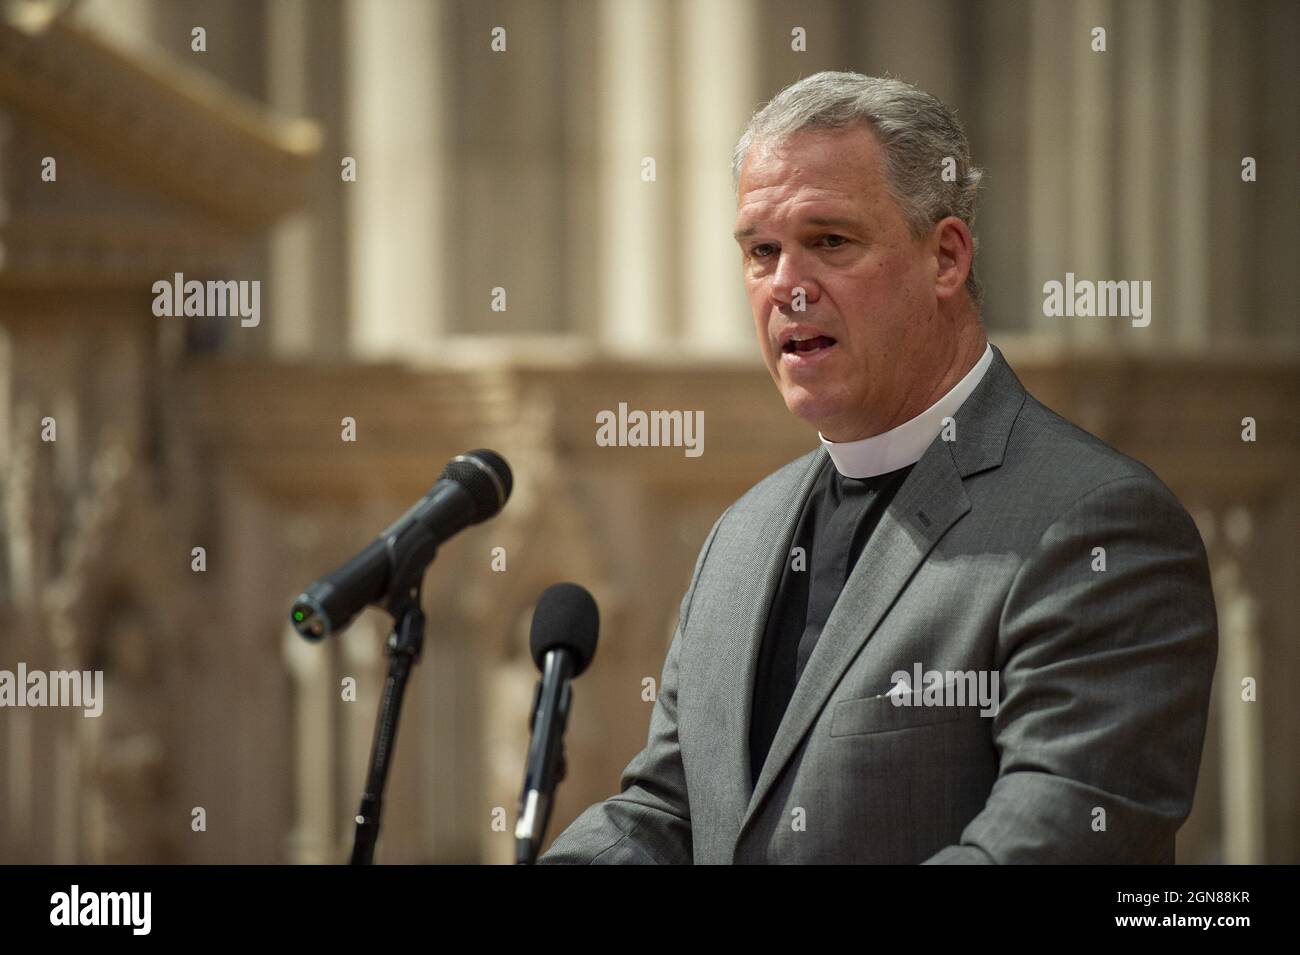 Washington, United States. 23rd Sep, 2021. Dean of the Washington National Cathedral Randy Hollerith announces cathedral has commissioned American artist Kerry James Marshall and poet Elizabeth Alexander to create new racial justice themed stained glass windows and inscriptions for the cathedral's southern wall on Thursday, September 23, 2021. The new windows will replace ones removed in 2017 featuring Confederate generals Robert E. Lee and Thomas 'Stonewall' Jackson. Photo by Bonnie Cash/UPI Credit: UPI/Alamy Live News Stock Photo